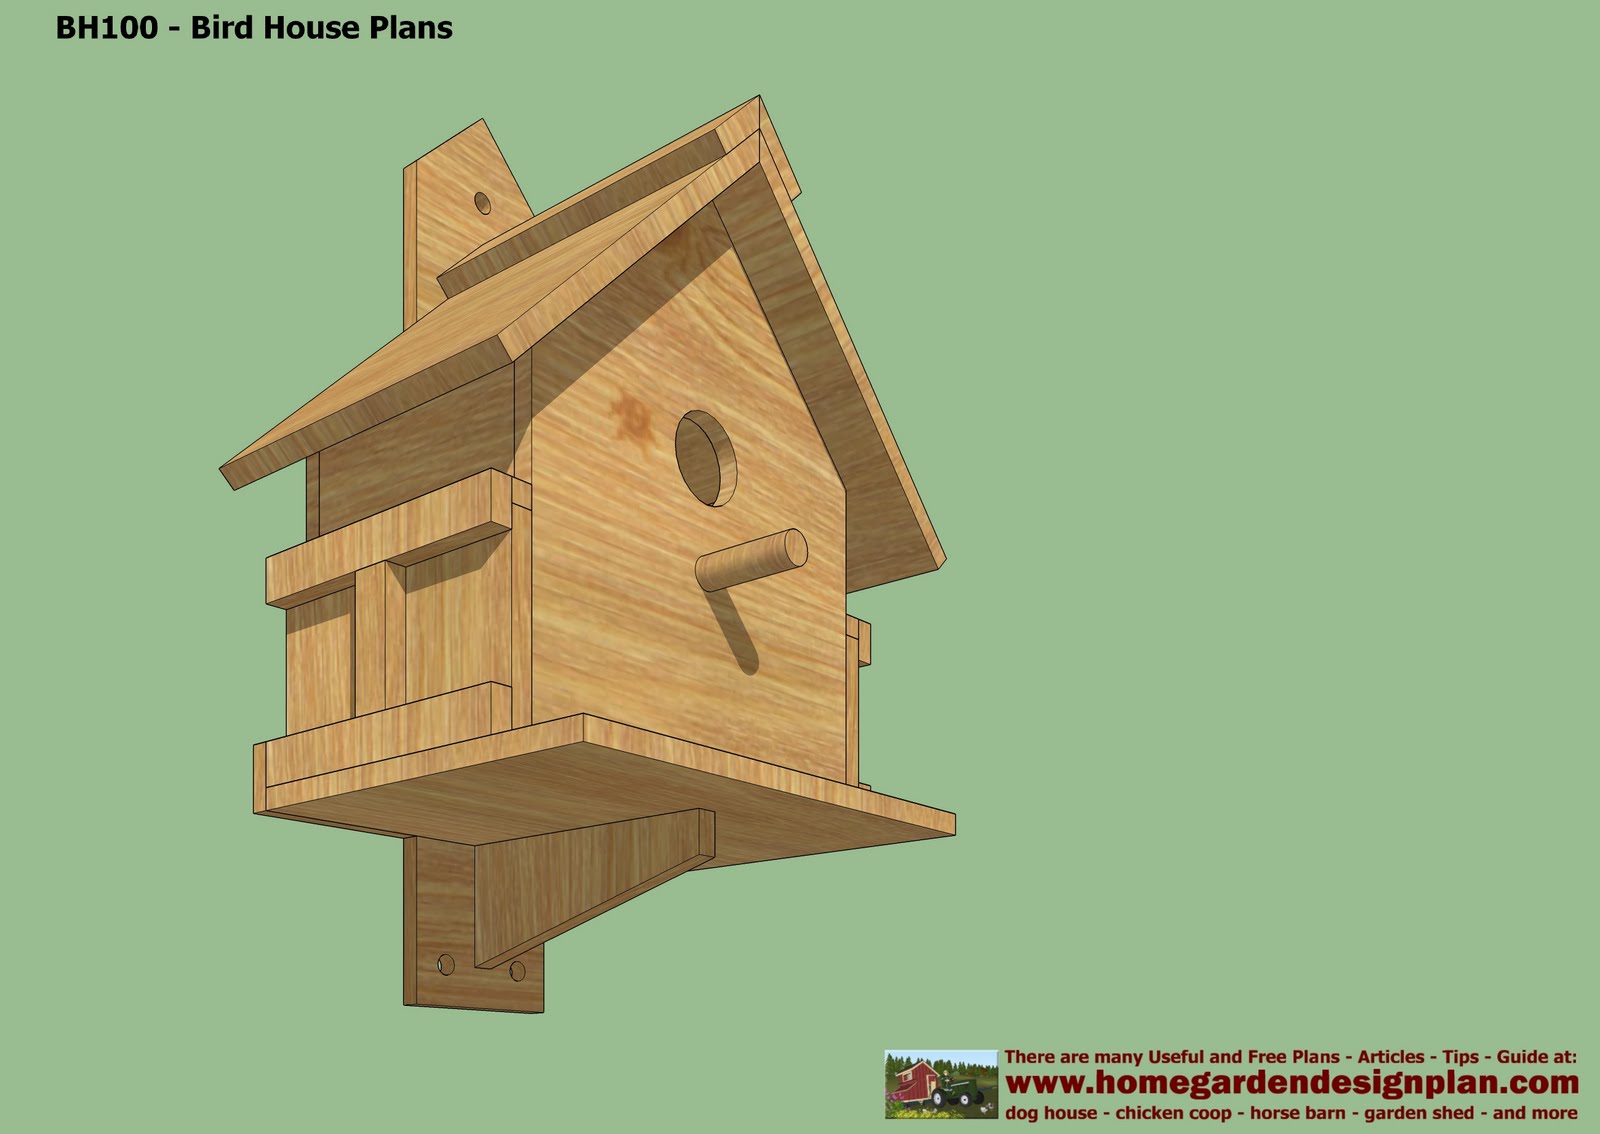  House Plans Free - Free Bird House Plans - How To Build A Bird House